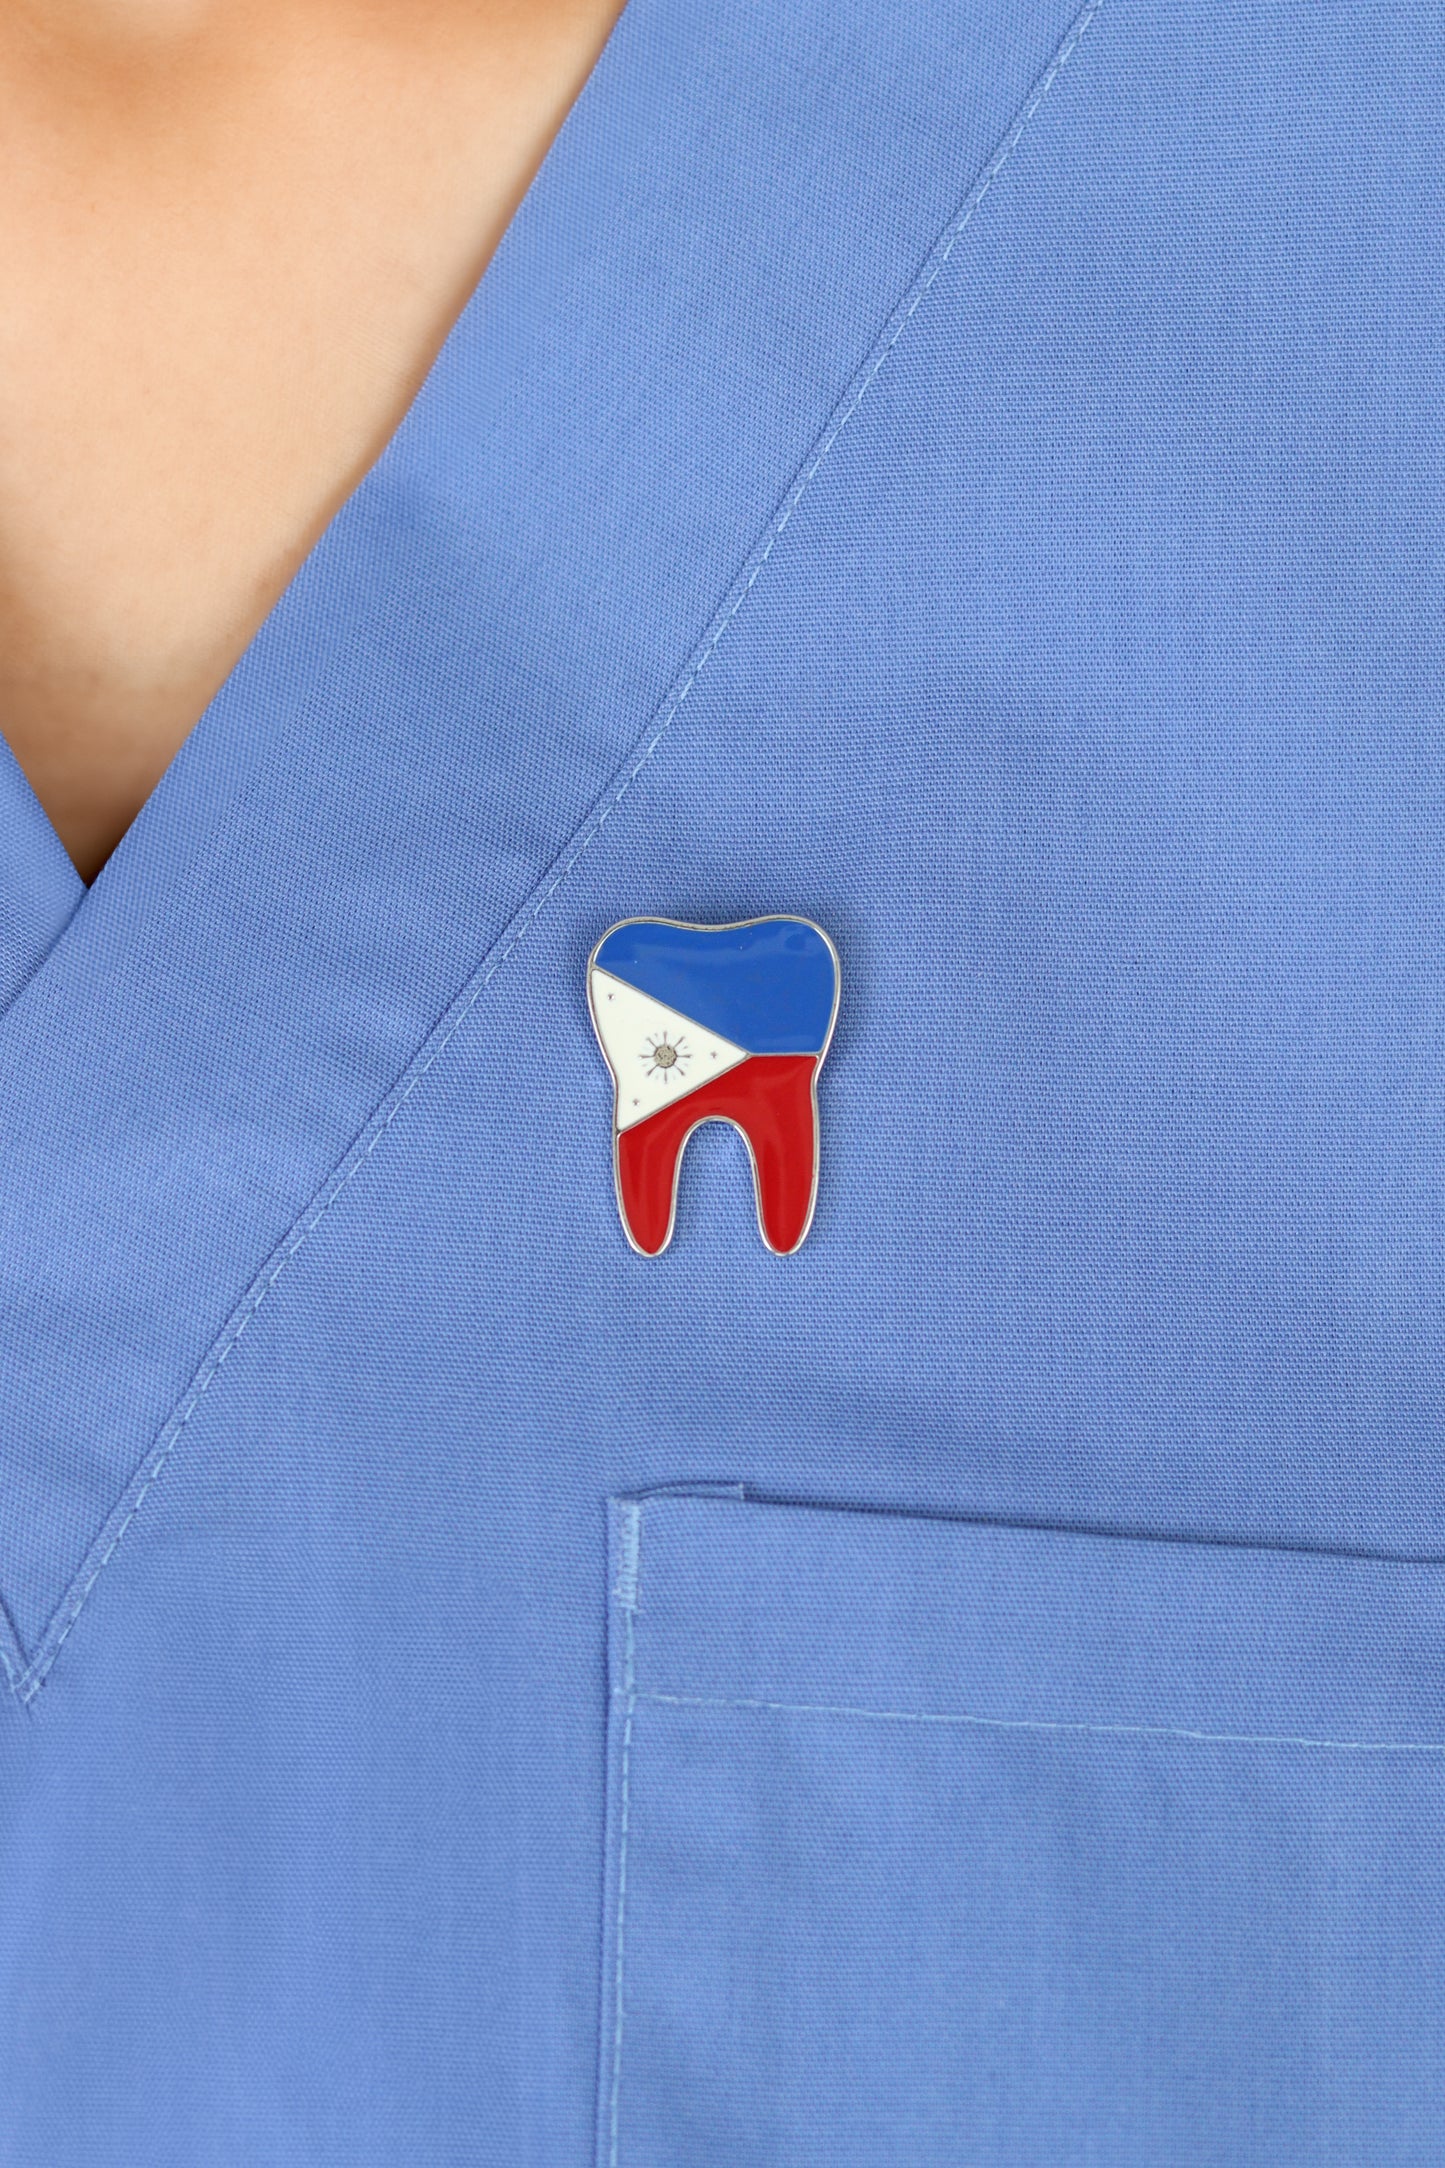 Philippines Tooth Pin